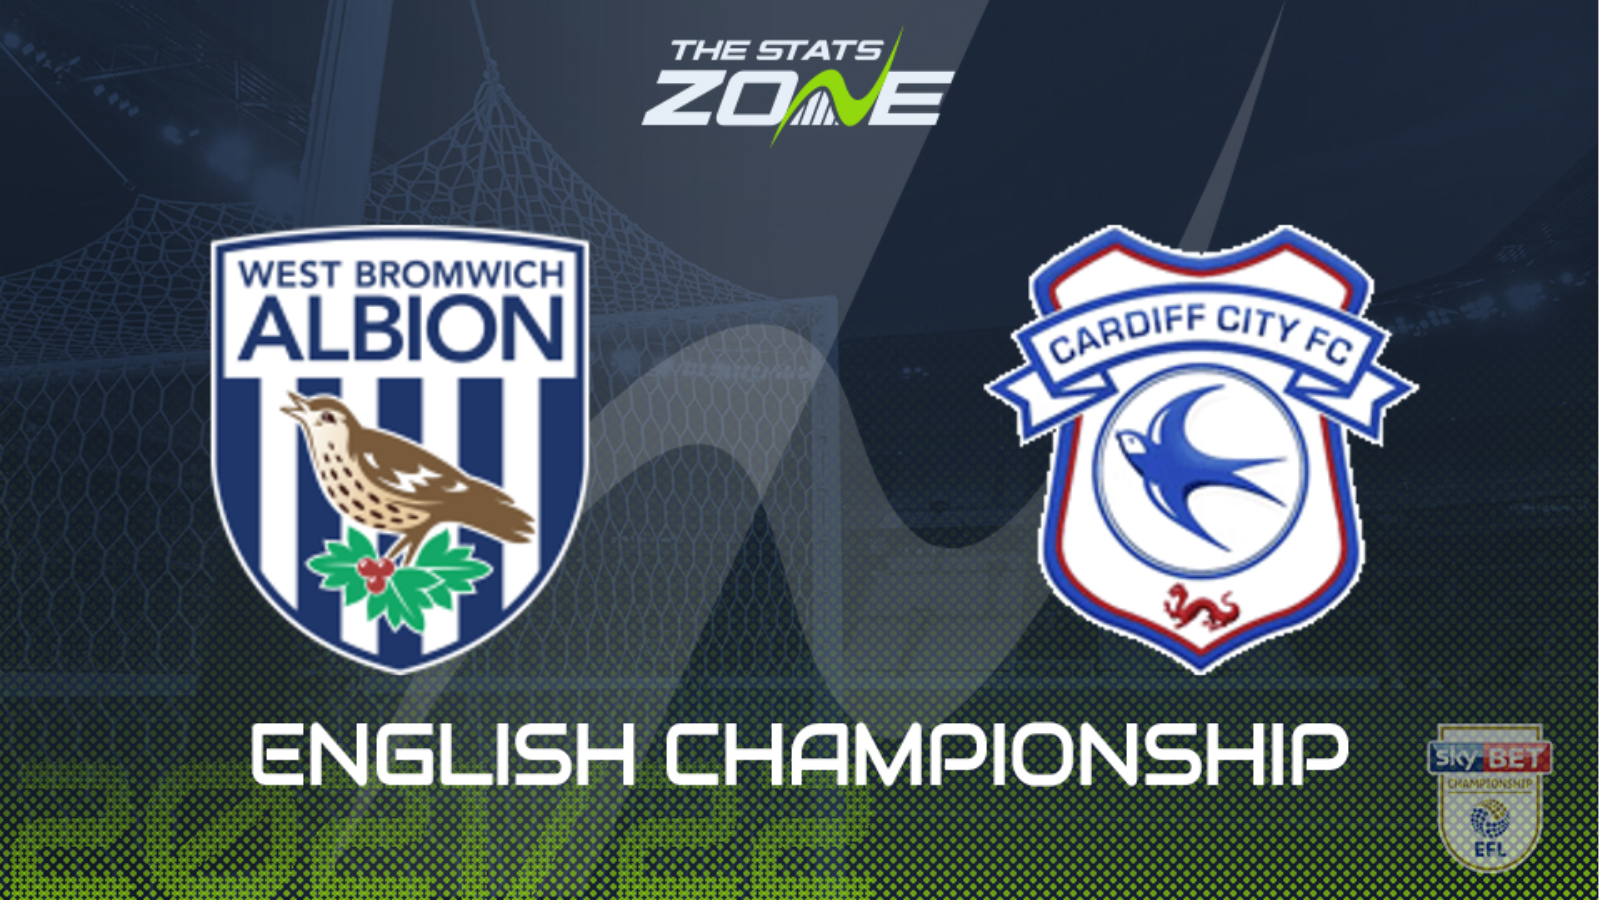 West Brom vs Cardiff Preview & Prediction - The Stats Zone